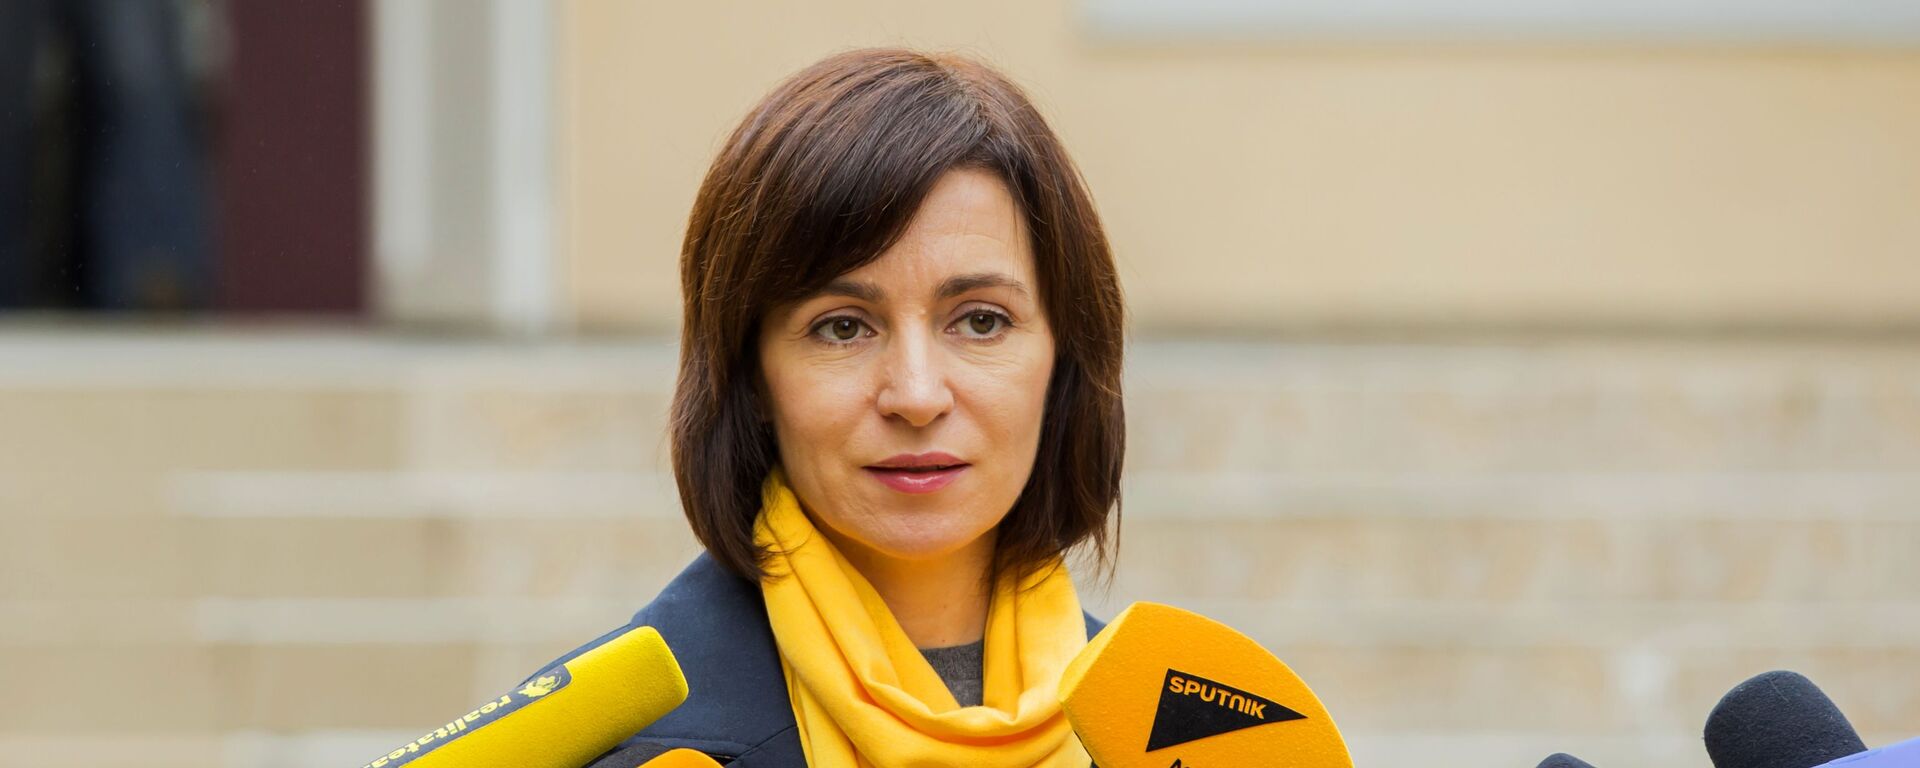 Prime Minister of the Republic of Moldova Maia Sandu answers questions from reporters during the elections at the polling station in Chisinau on October 20, 2019 during the local government elections in Moldova. - Sputnik International, 1920, 19.04.2023